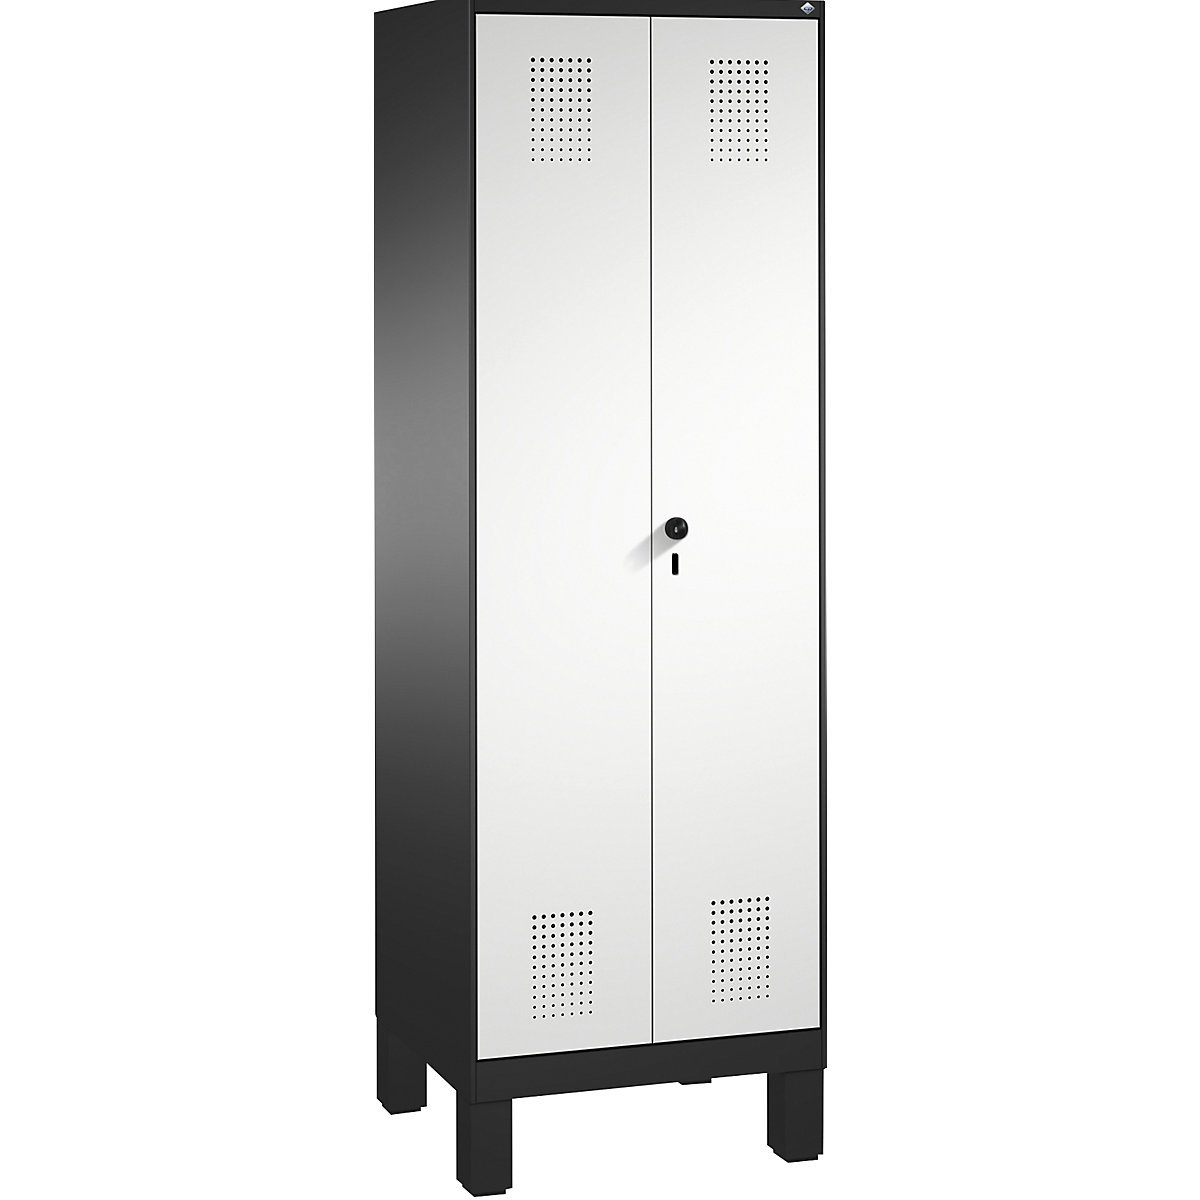 EVOLO laundry cupboard / cloakroom locker – C+P, 4 shelves, clothes rail, compartments 2 x 300 mm, with feet, black grey / light grey-8